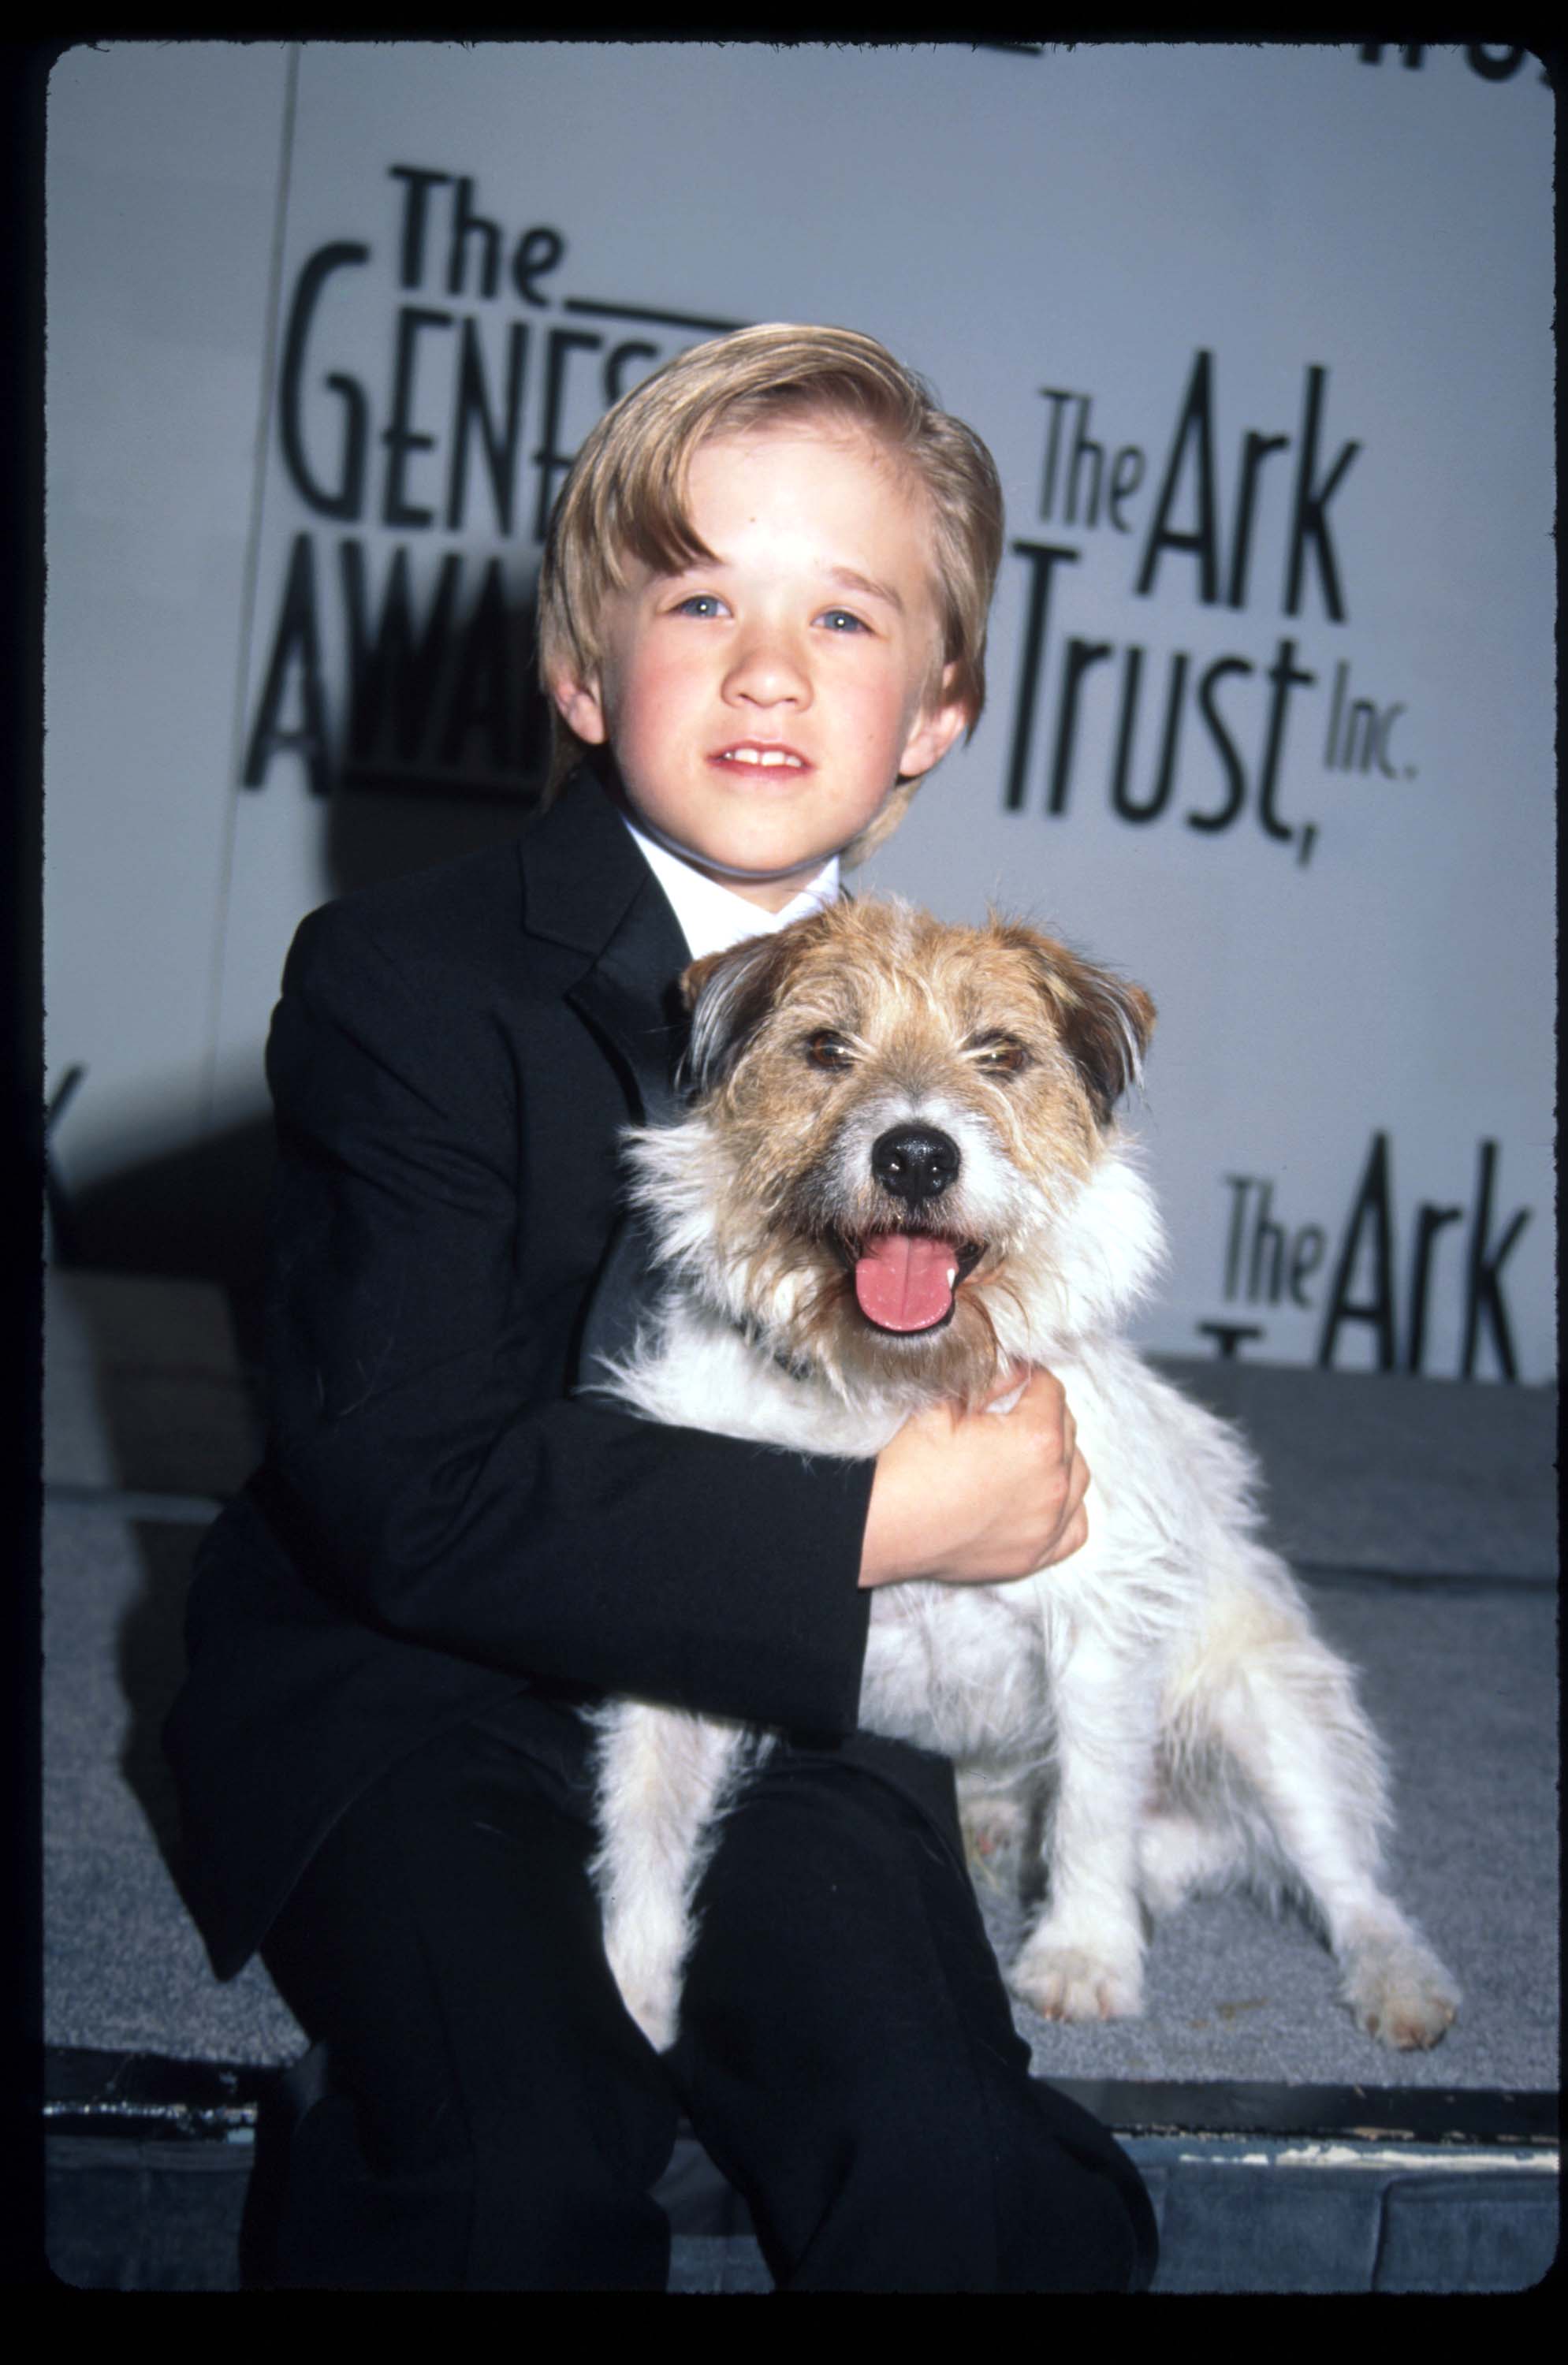 Haley Osment holds Sparky the dog at the Genesis Awards on April 5, 1997 in Los Angeles, California. | Source: Getty Images